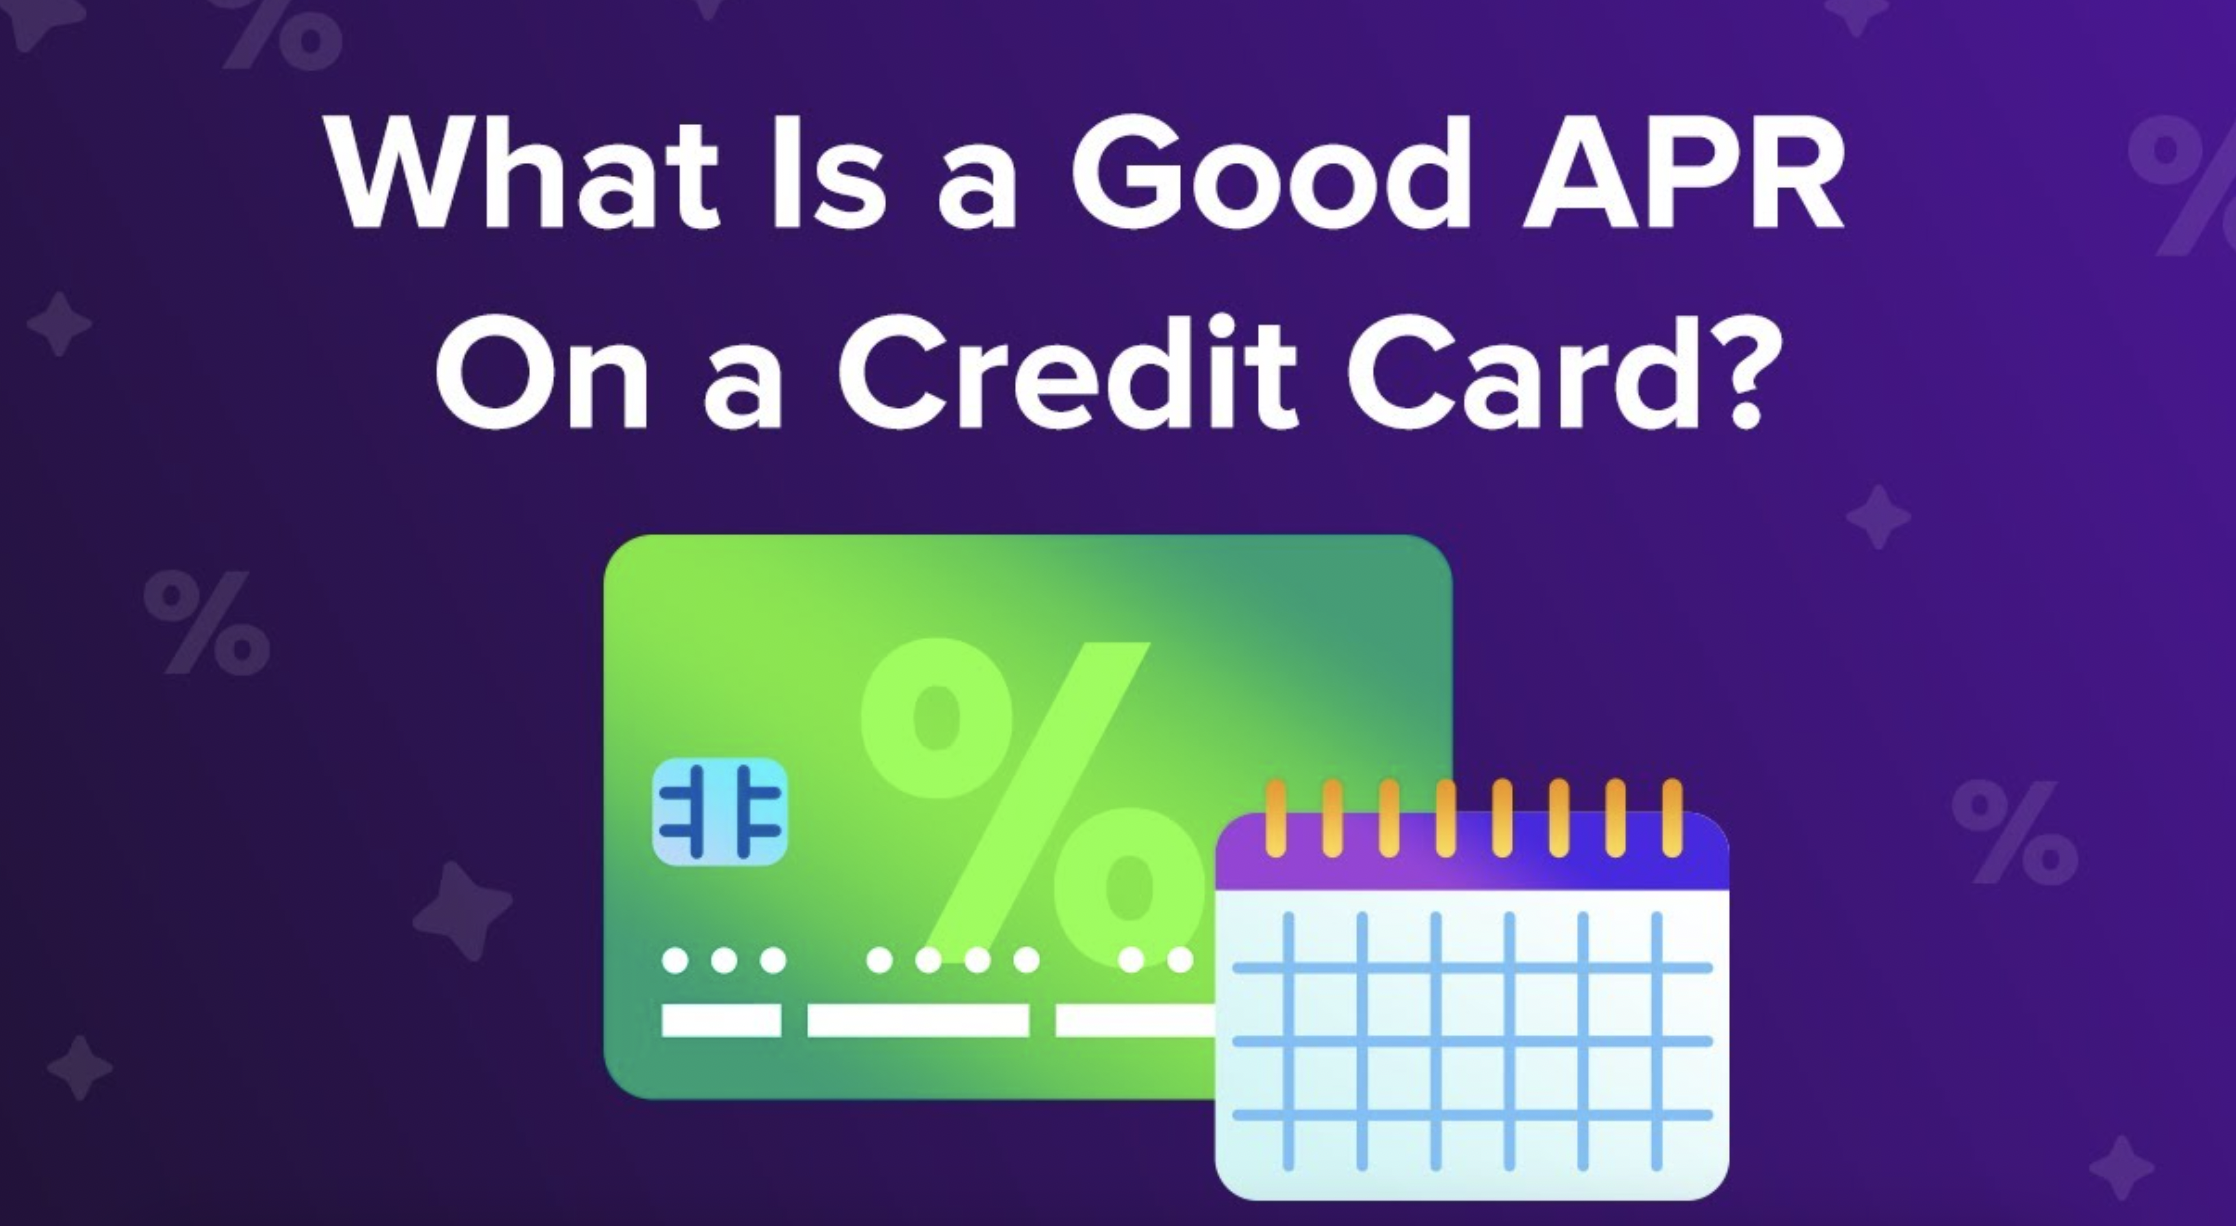 What Are Ways to Get A Low APR On A Credit Card?